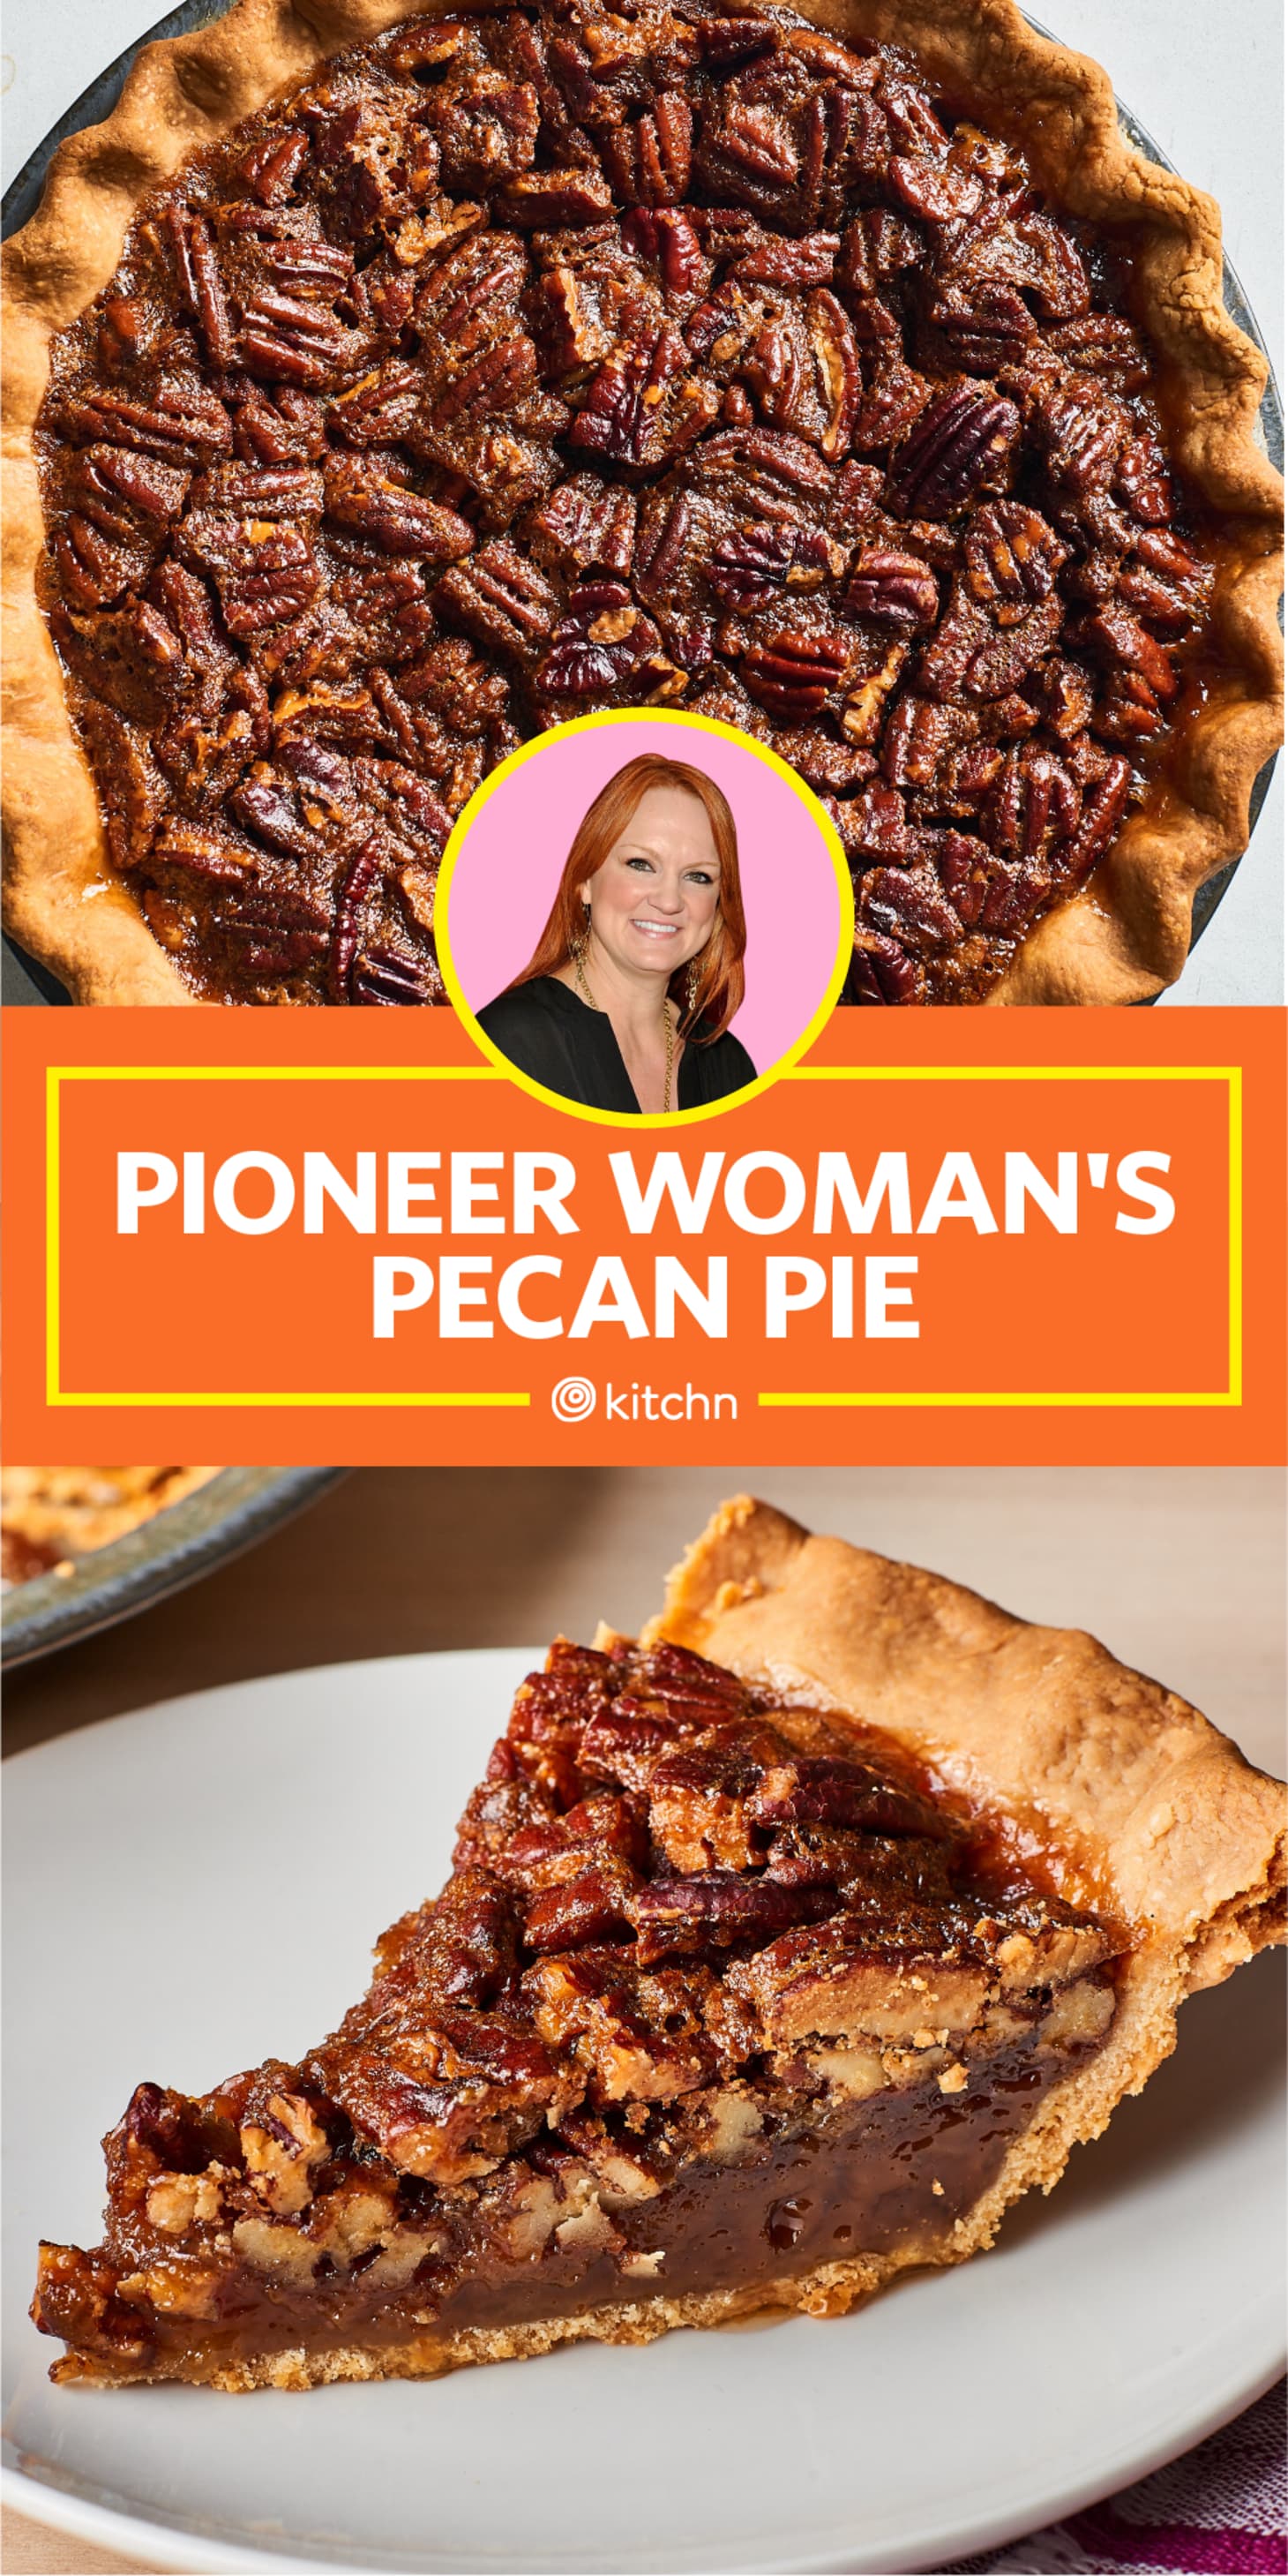 I Tried Pioneer Woman's Famous Pecan Pie Recipe | Kitchn